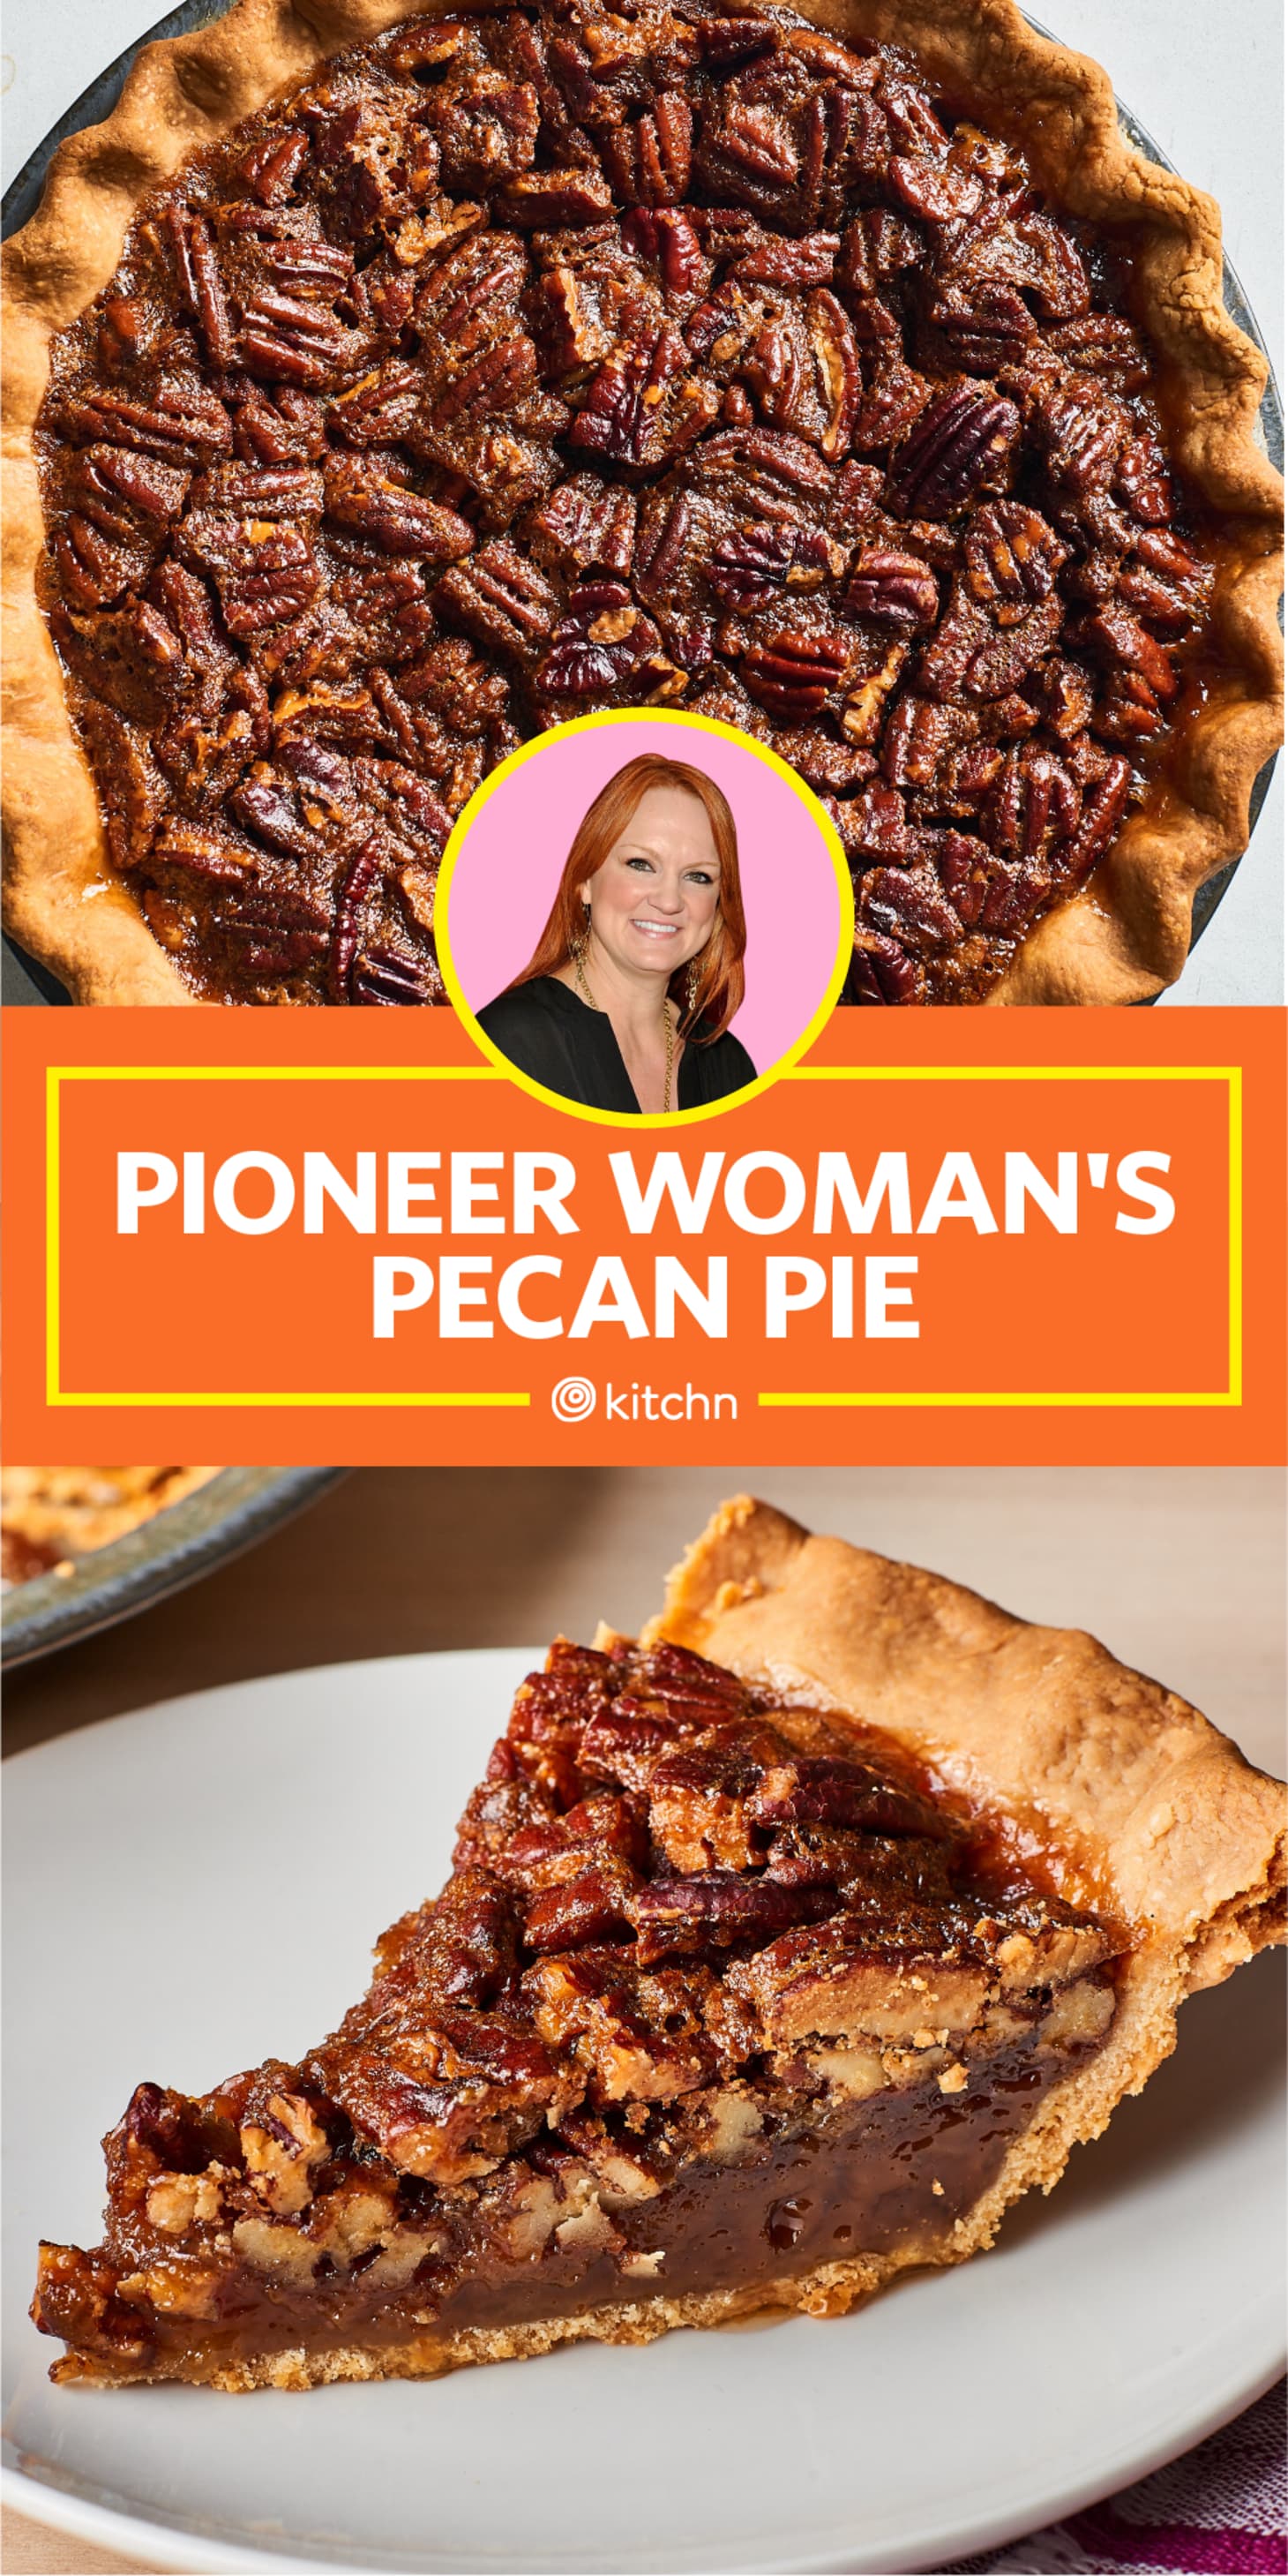 I Tried Pioneer Woman's Famous Pecan Pie Recipe | Kitchn